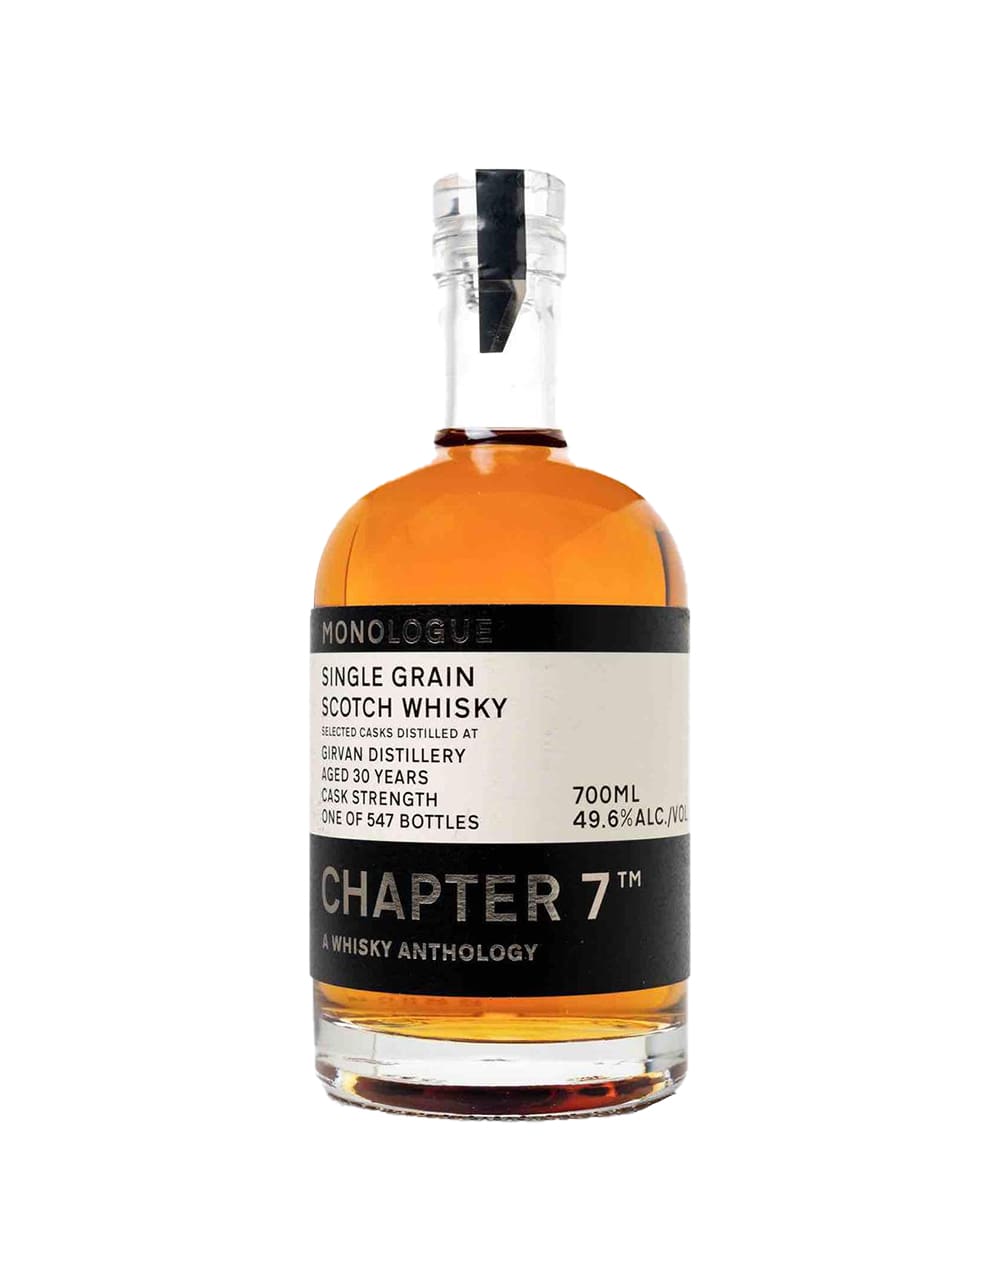 Chapter 7 Monologue 30 Year Old Girvan 1991 Scotch Whisky